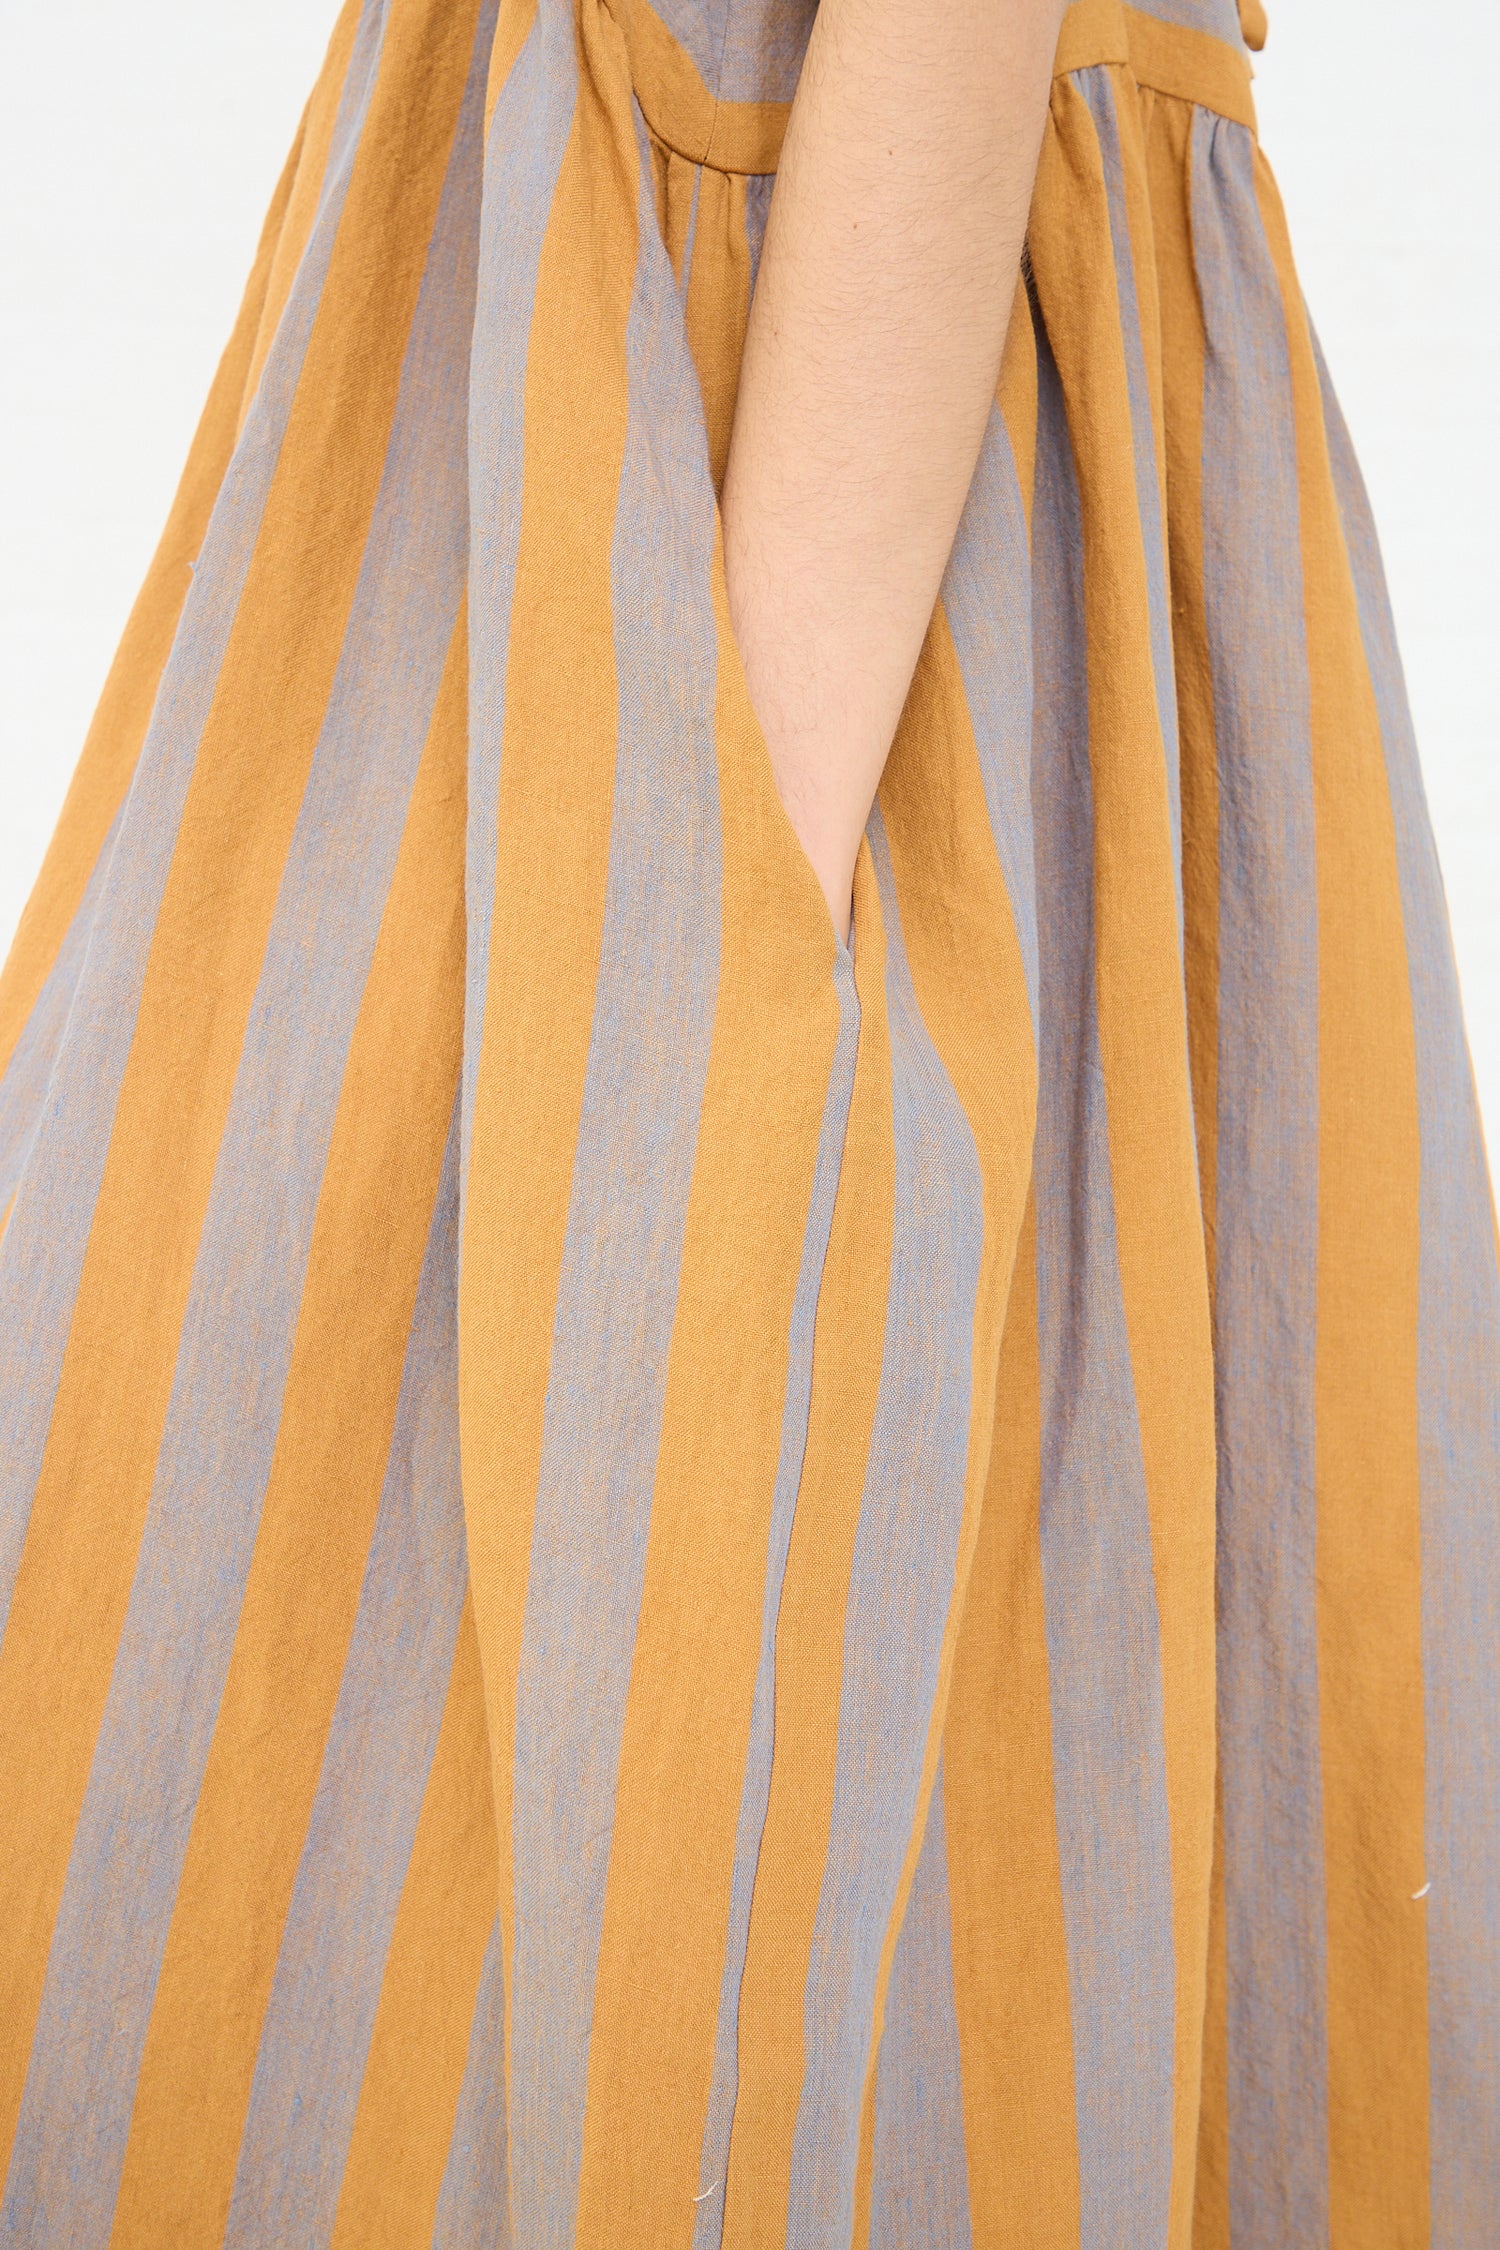 A close-up view of a person's side, with their arm resting against an oversized, Cawley Irish Linen Elba Dress in Bronze.